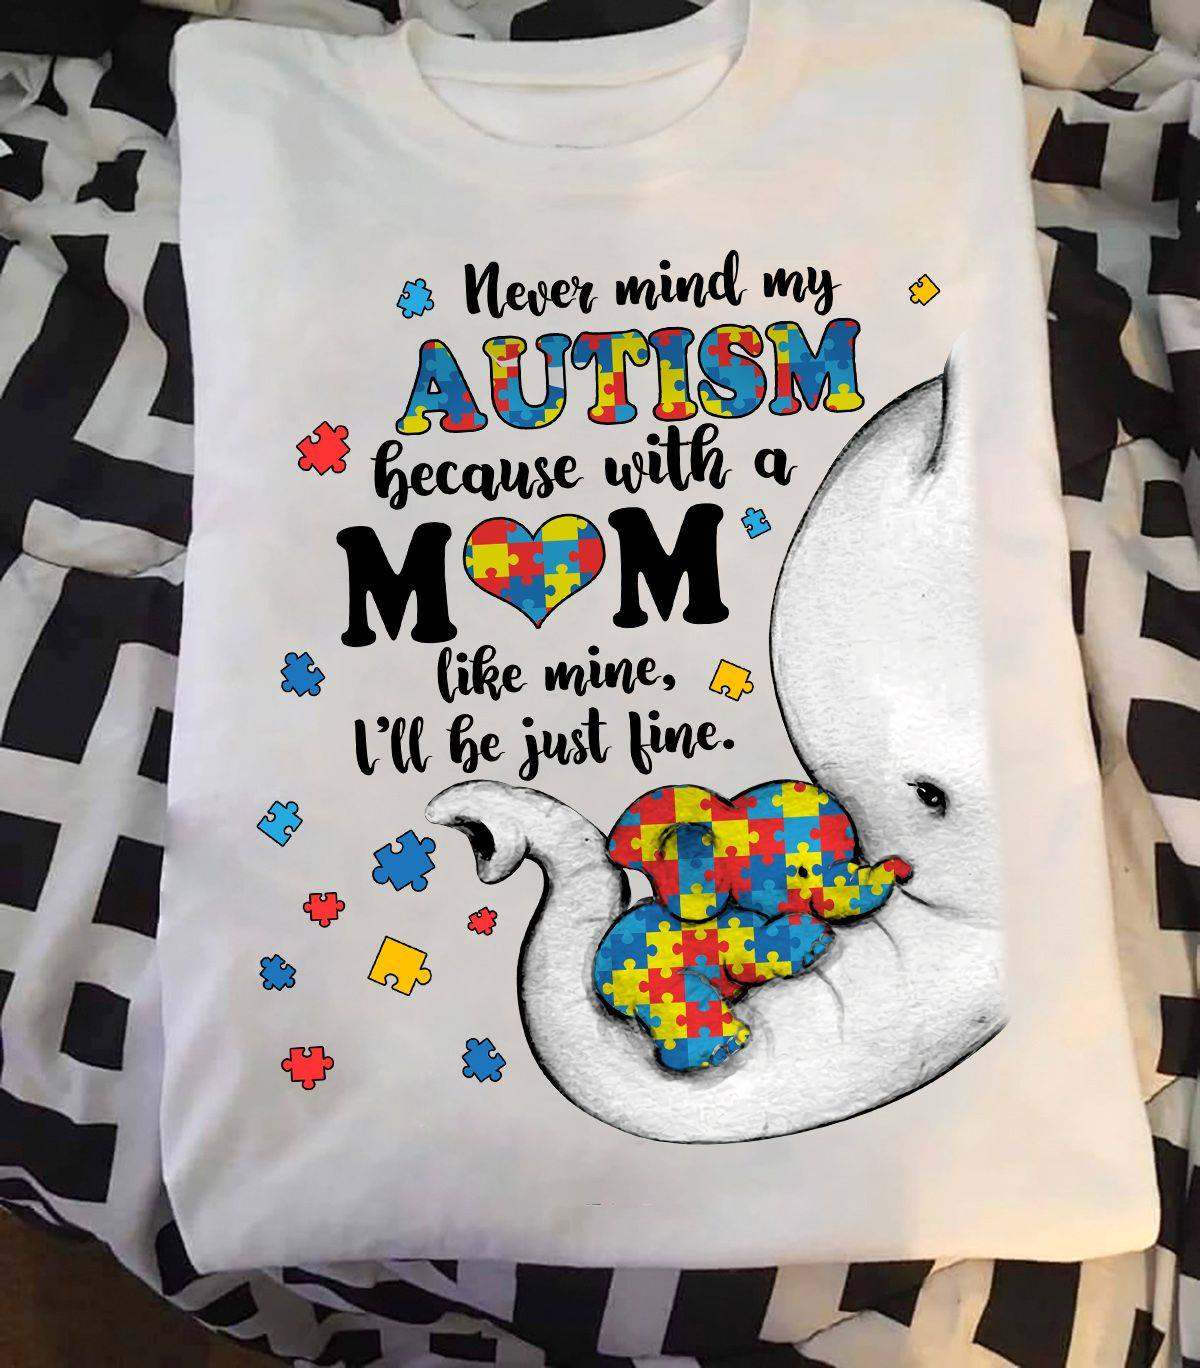 Never mind my autism because with a mom like mine, I'll be just fine - Autism elephant, autism awareness